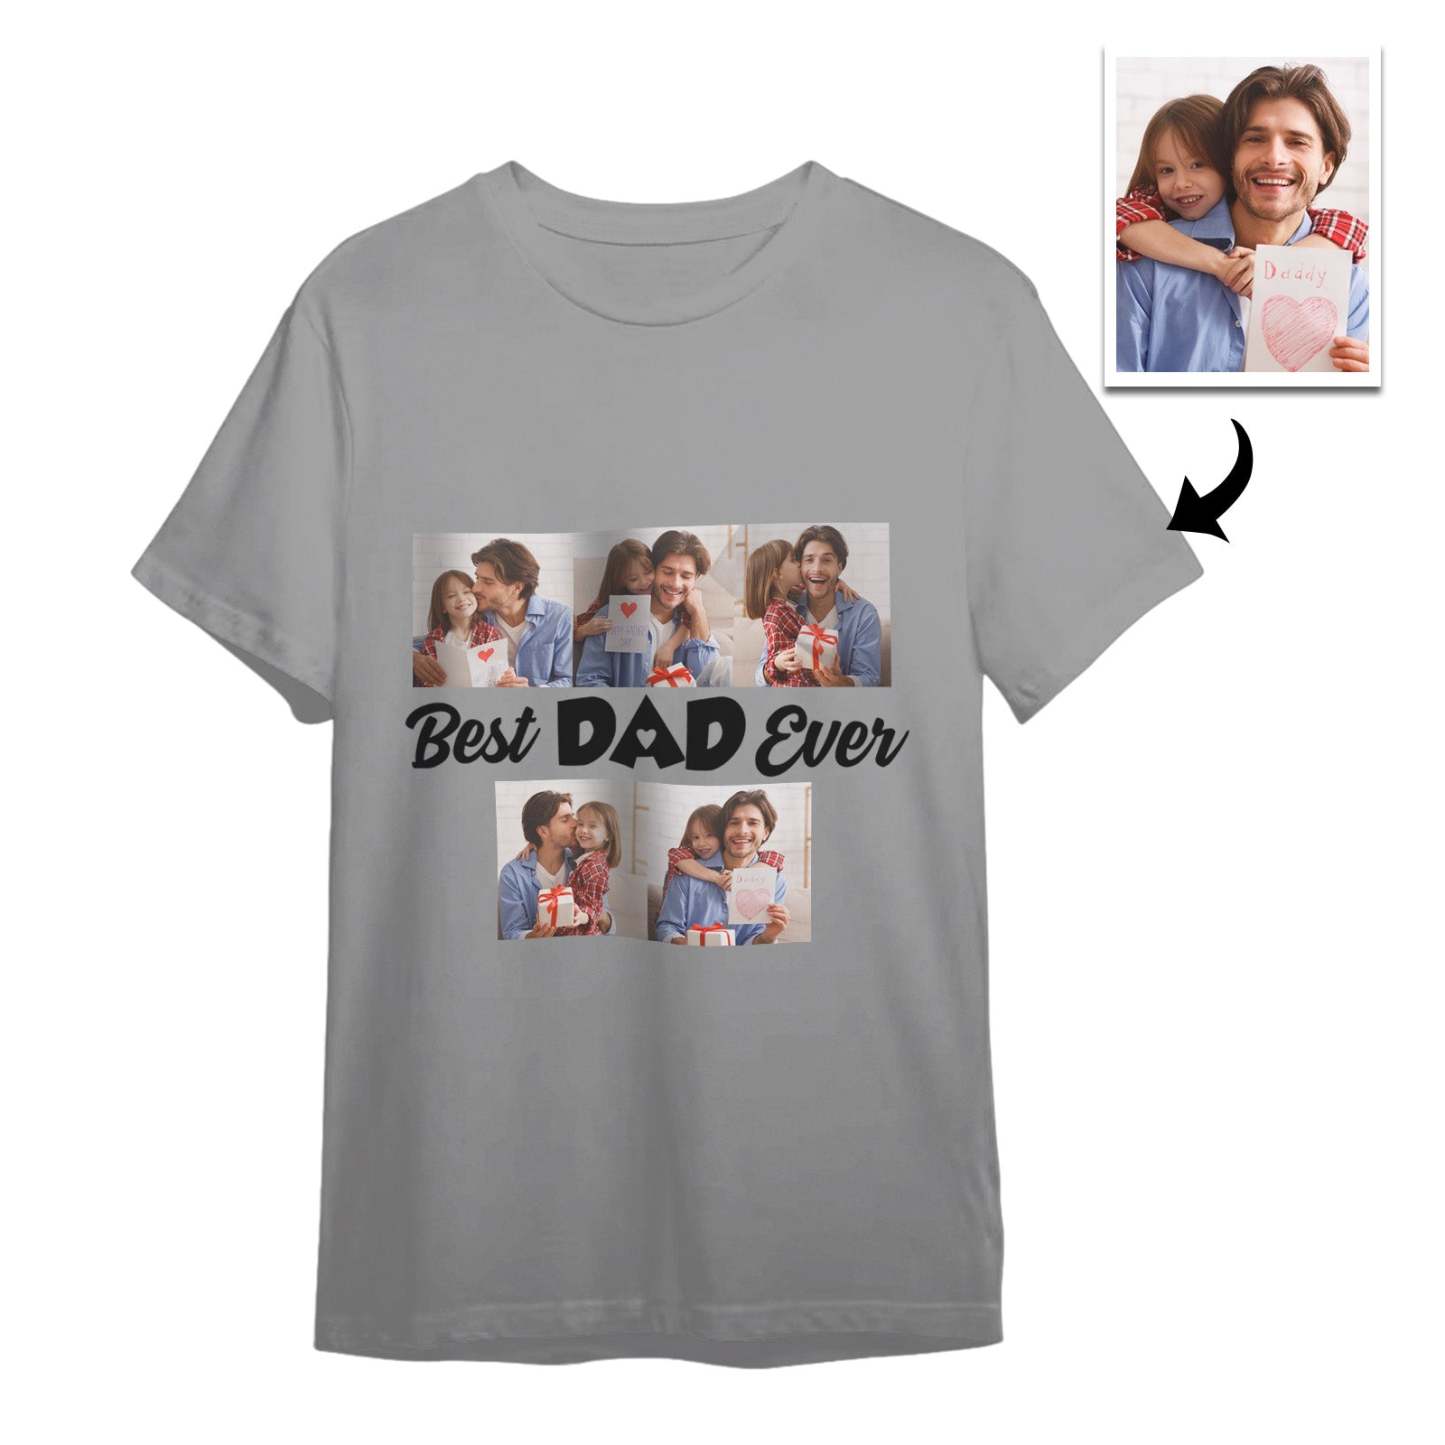 Custom 5 Photos T-Shirt With Best Dad Ever Personalized Photos T-Shirt Father's Day Gift - MyPhotoSocksAu